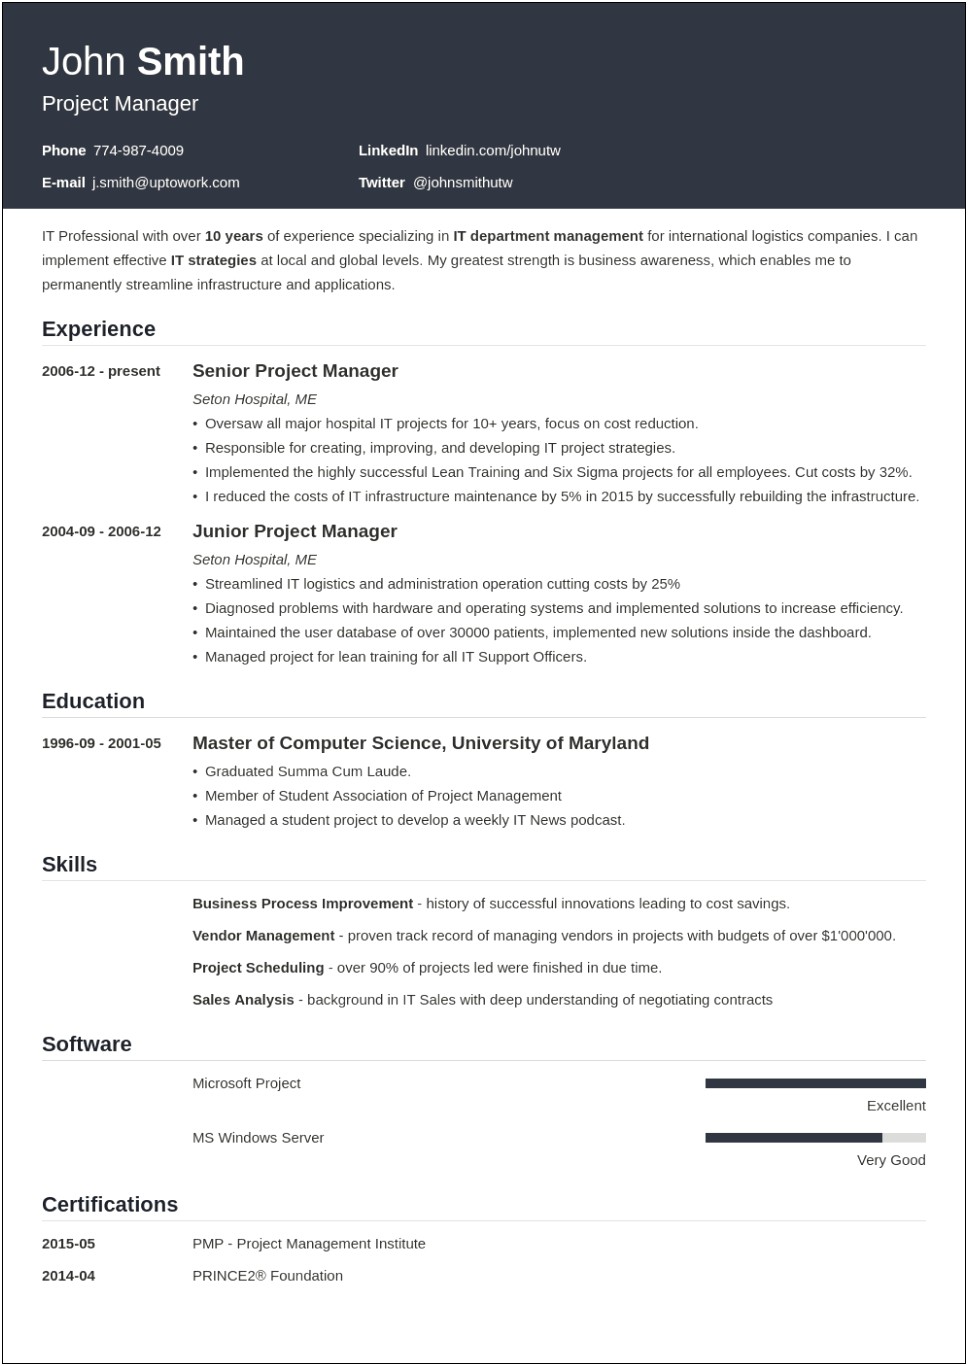 Resume Format Template For Job